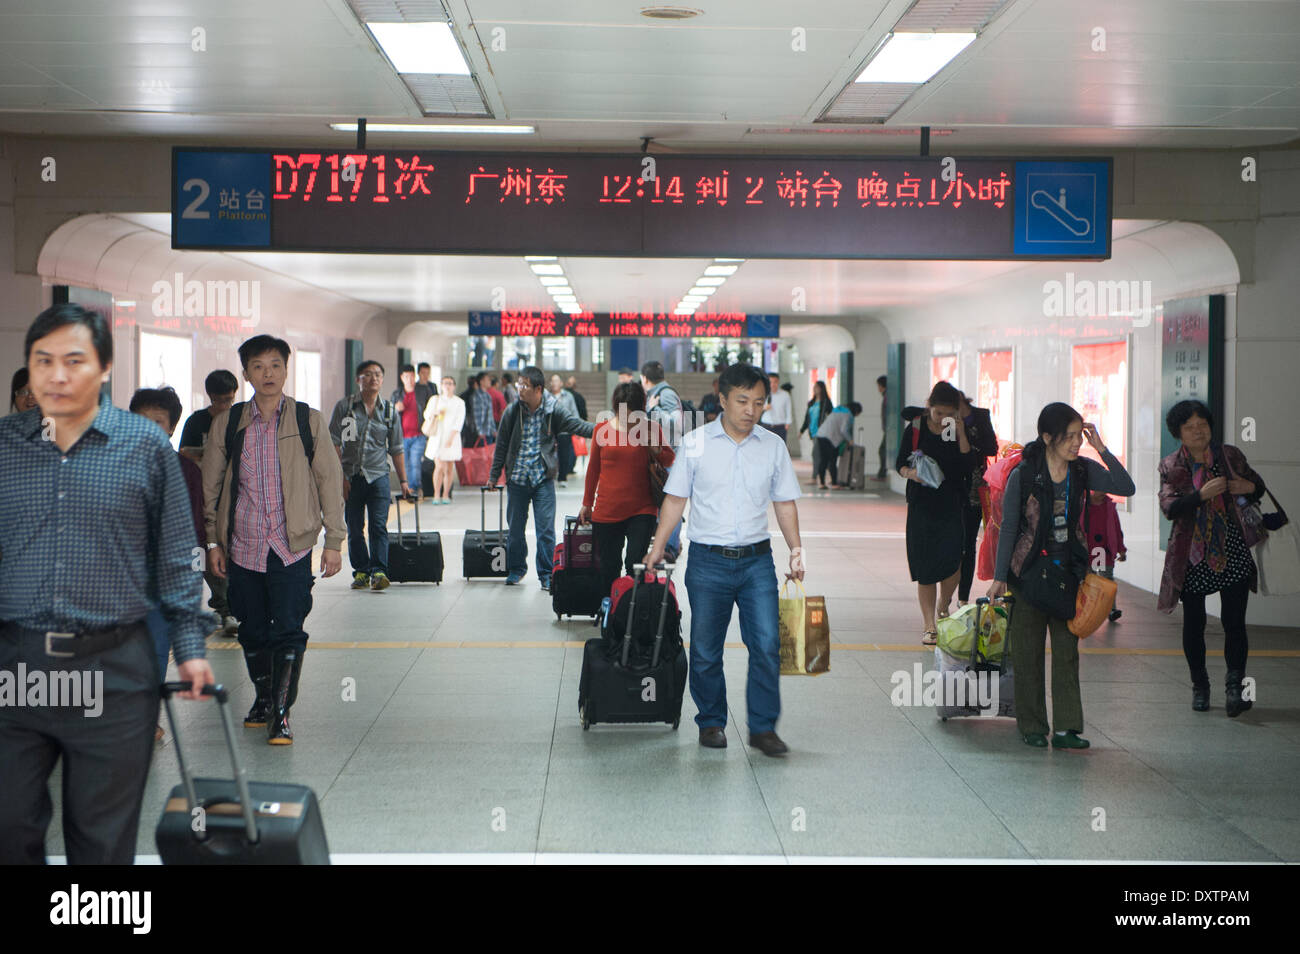 Shenzhen, China's Guangdong Province. 31st Mar, 2014. Passengers walk out of the rail station of Shenzhen, south China's Guangdong Province, March 31, 2014. Heavy rain also grounded flights and stranded passengers at major airports of Guangdong since Sunday. As of 6:30 p.m., a total of 113 flights had been canceled at the Shenzhen Bao'an International Airport on Monday, with 43 outbound flights delayed for at least two hours, according to sources with the airport. © Mao Siqian/Xinhua/Alamy Live News Stock Photo